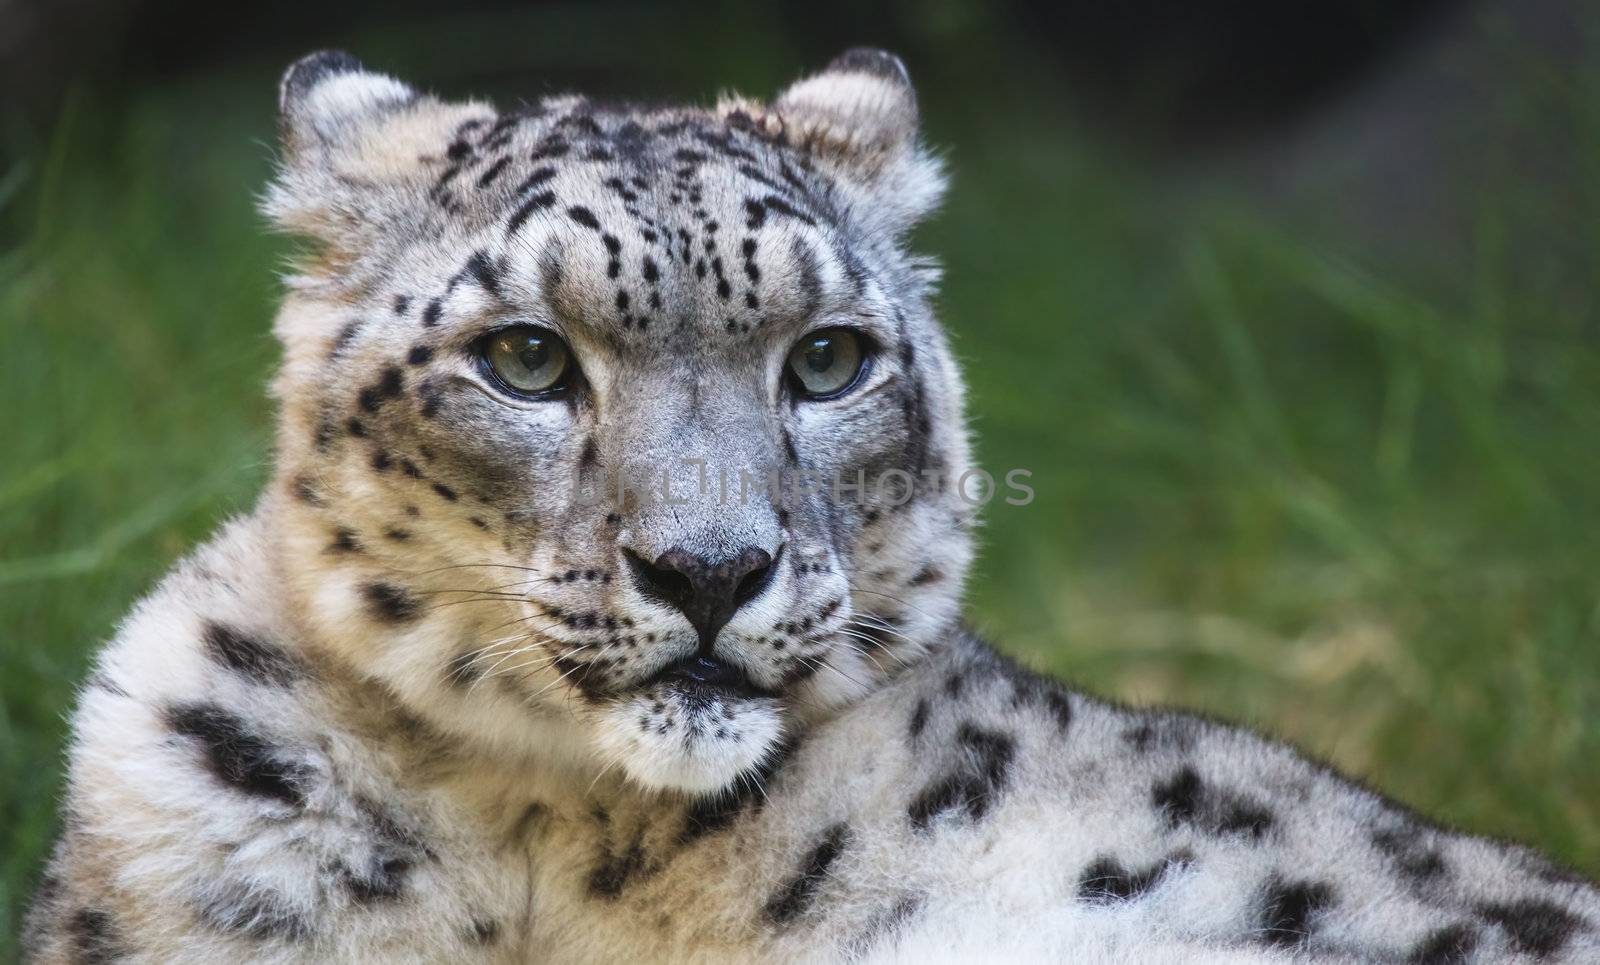 Young snow leopard looking to the right with a soft focus green grass background